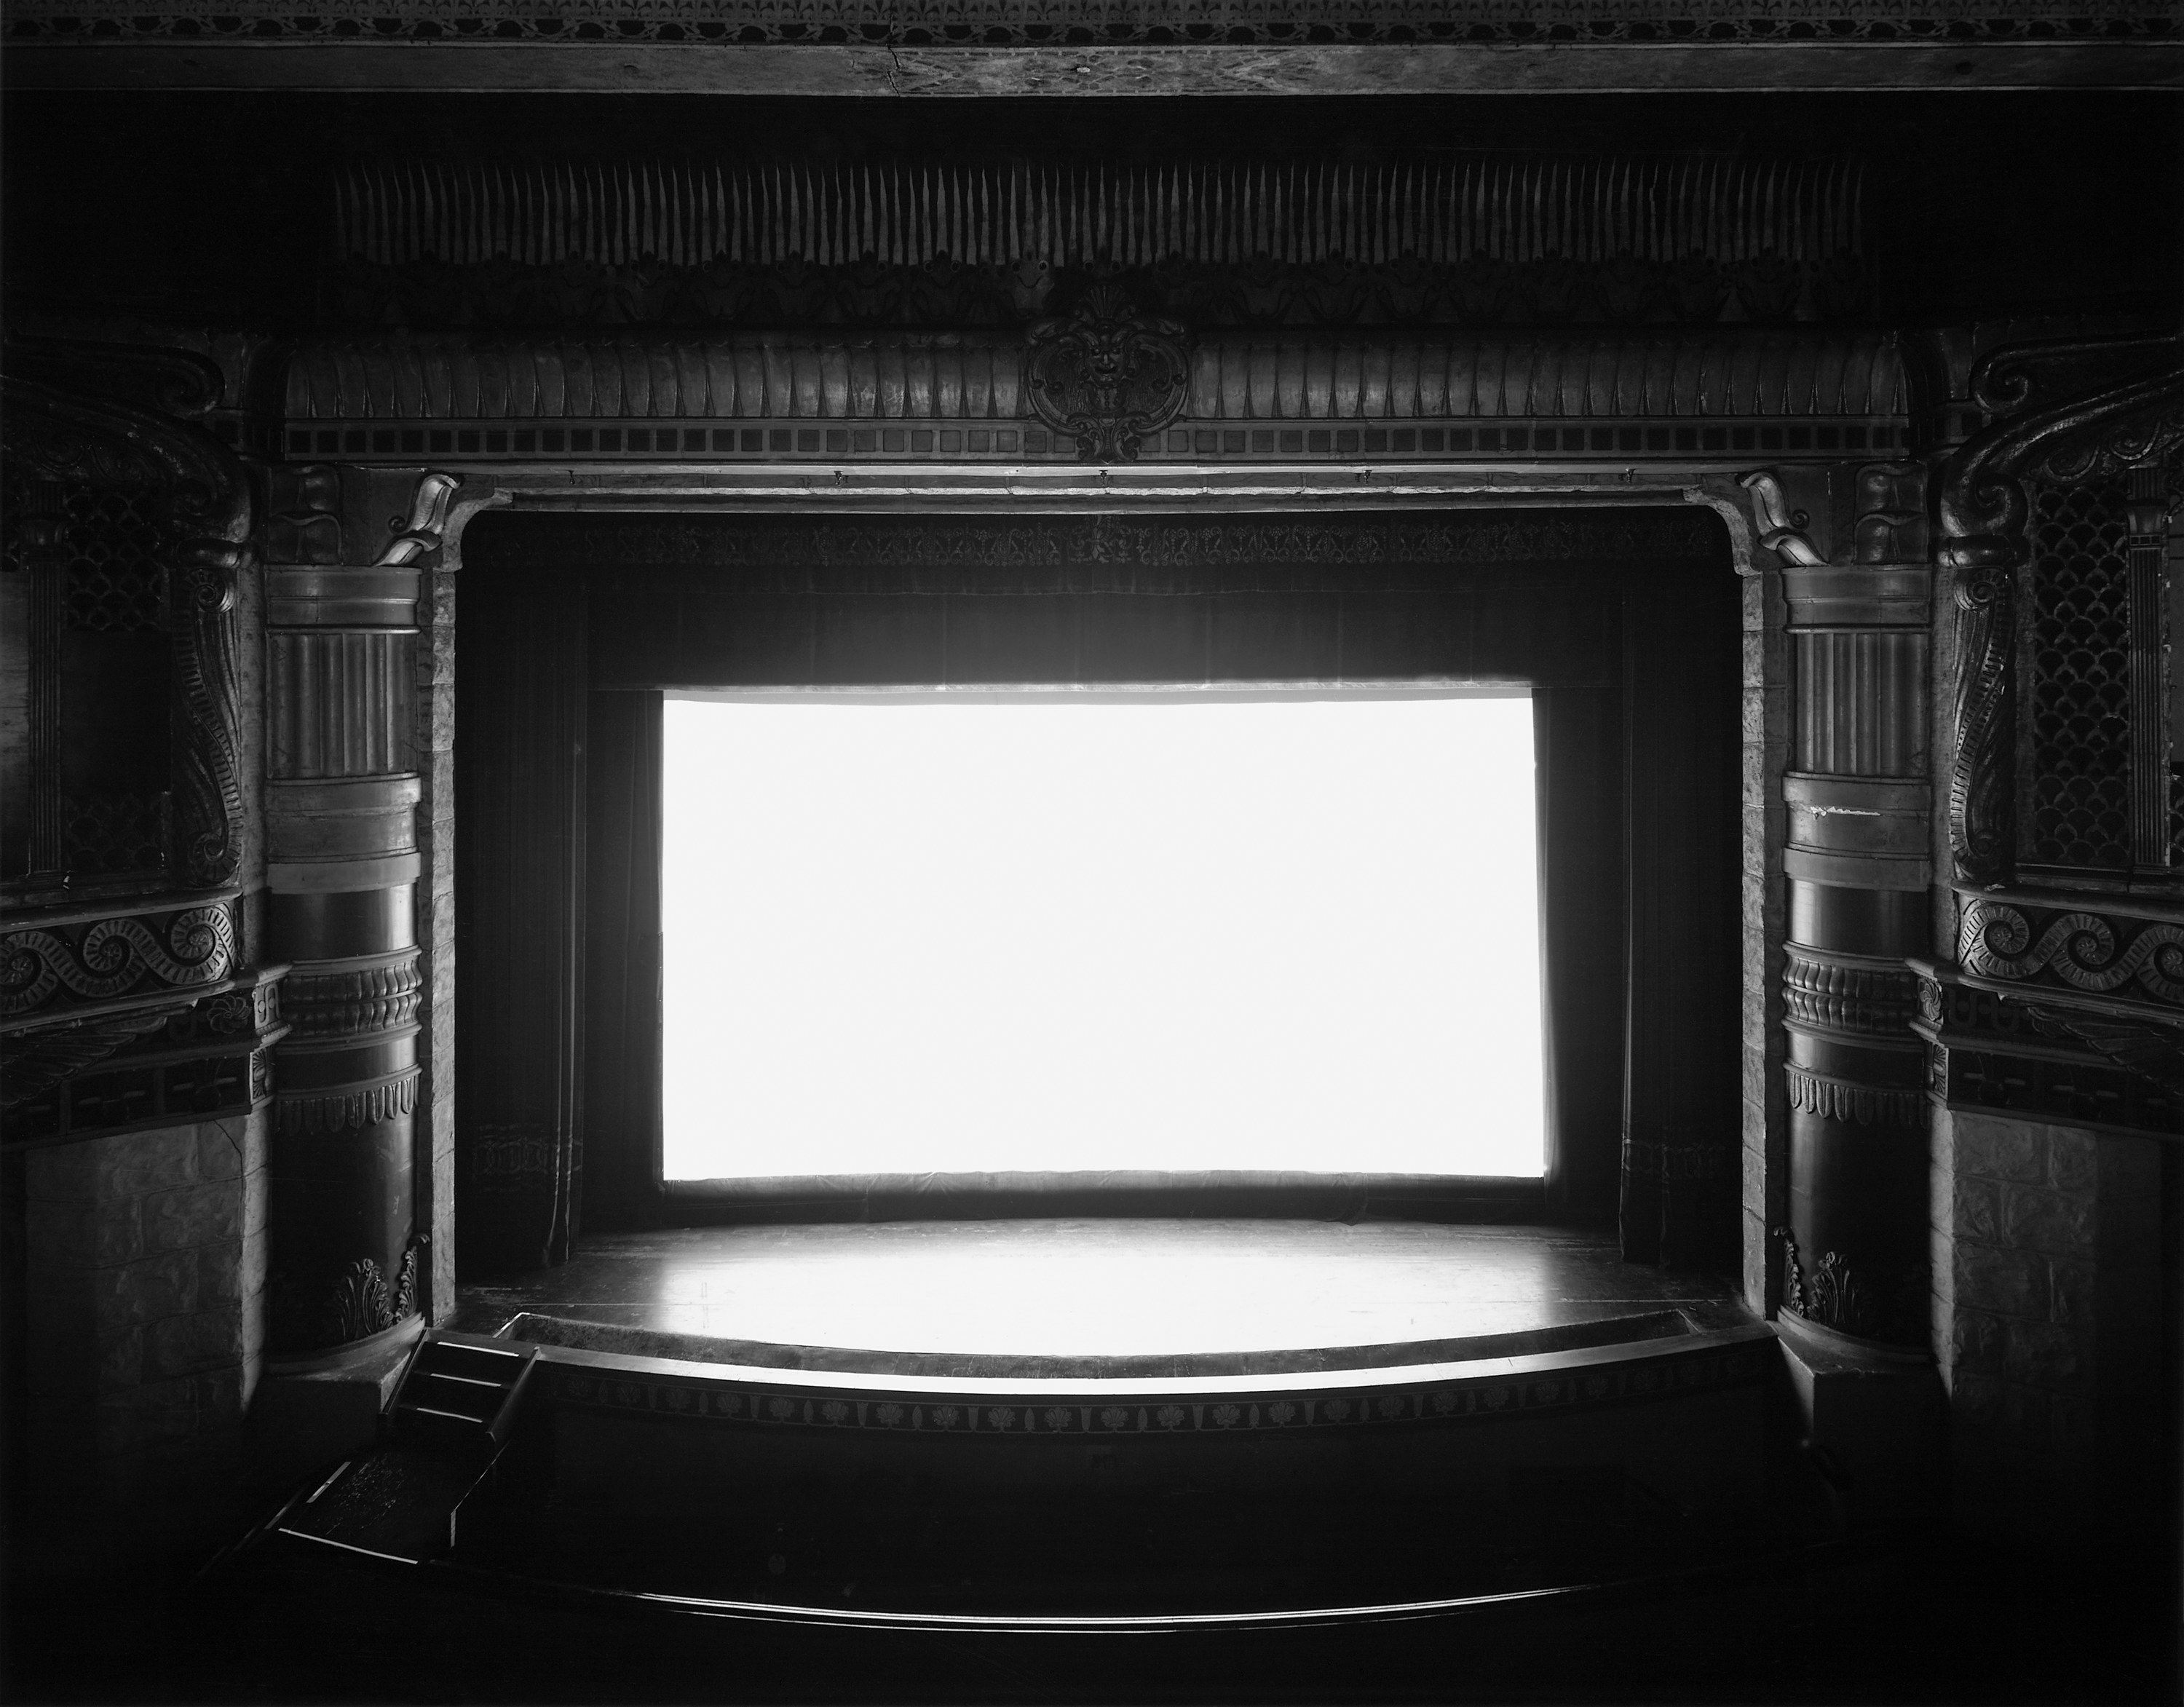 Black and white photograph of an empty theater with a blank white screen illuminating the space